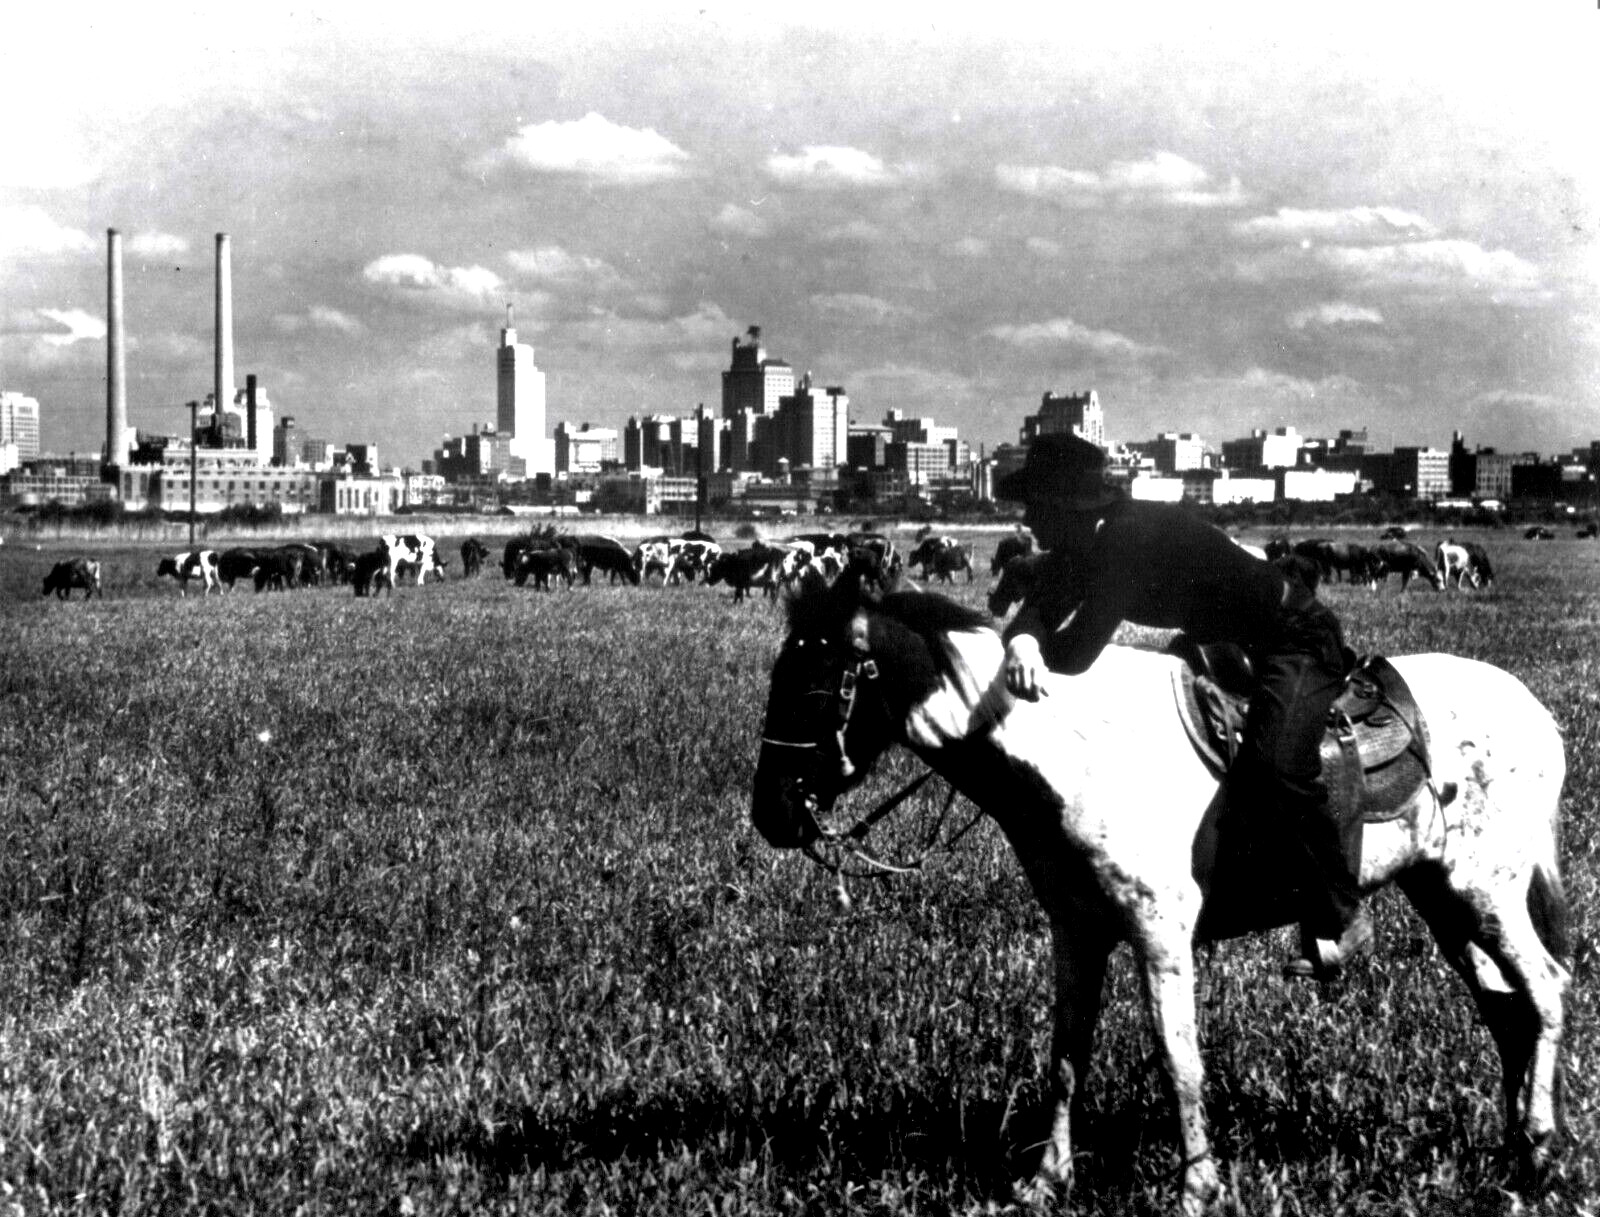 COWBOY WATCHING CATTLE WEST OF DOWNTOWN DALLAS 1945 8x10 GLOSSY FINISH PHOTO